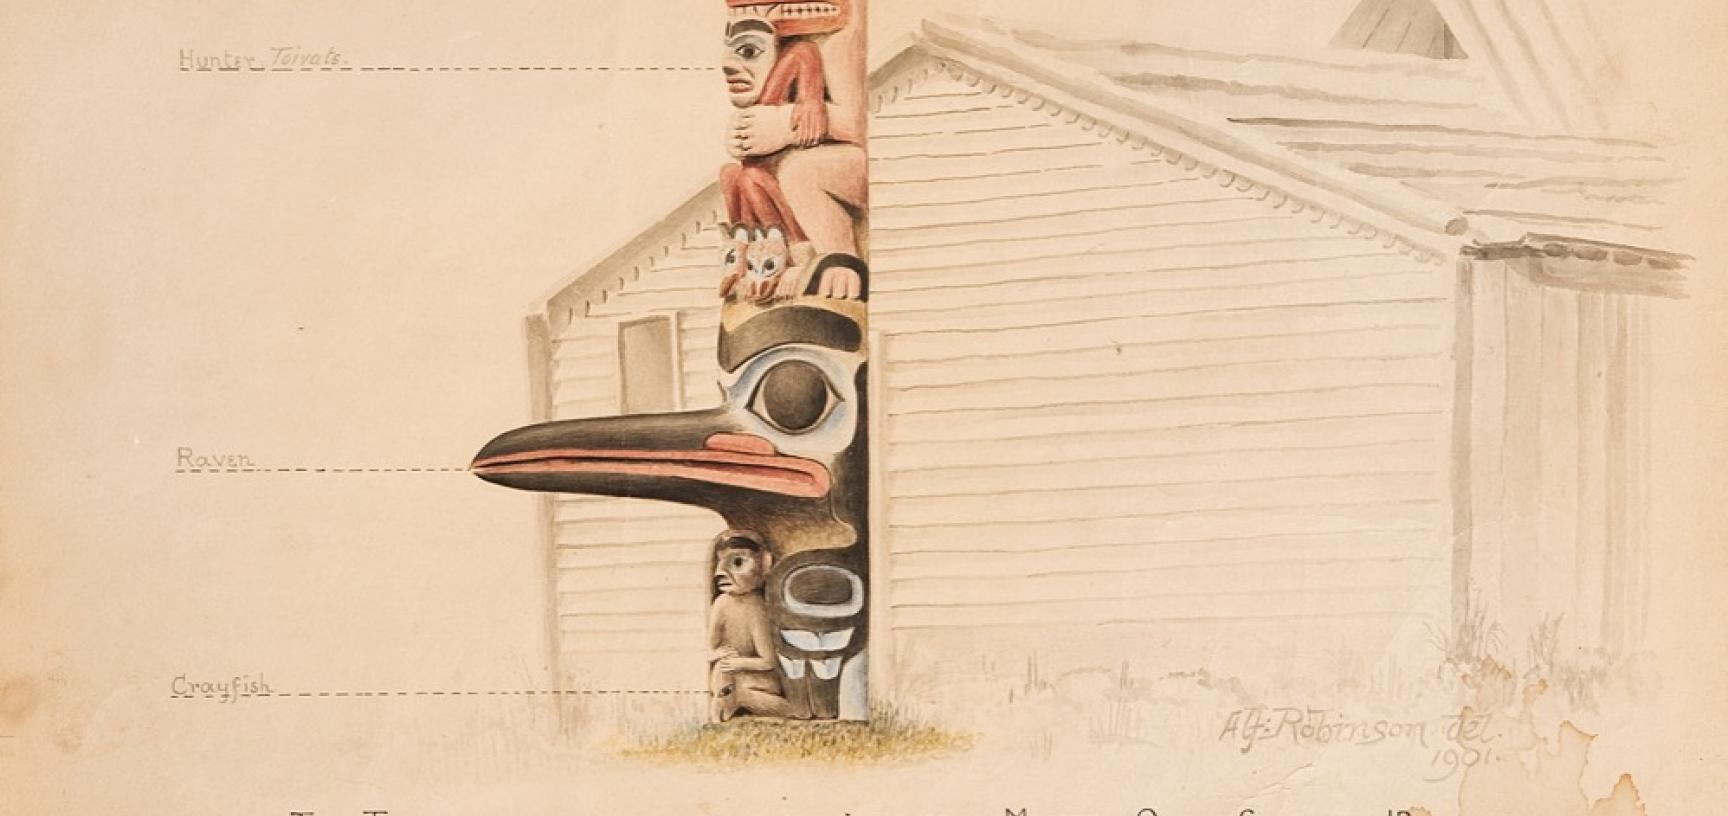 ‘The Totem-pole standing before the chief’s house in Masset, Queen Charlotte Id.’ Watercolour painting by Alfred Robinson. 1901. (Copyright Pitt Rivers Museum, University of Oxford. Accession Number: 2004.144.1)